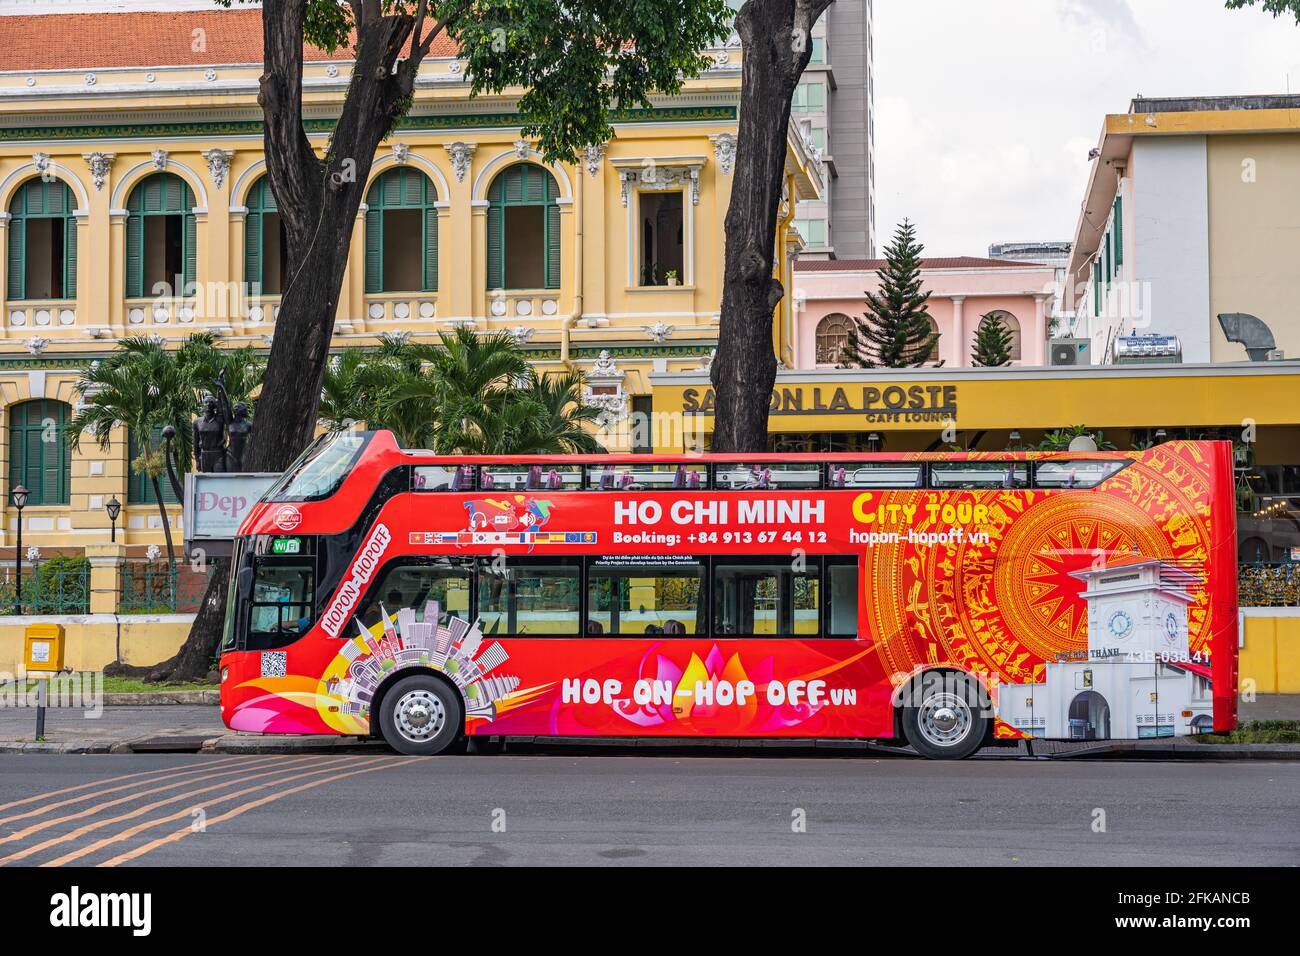 HO CHI MINH CITY, VIETNAM - April 26 2021: sightseeing double decker bus waiting for tourists Stock Photo